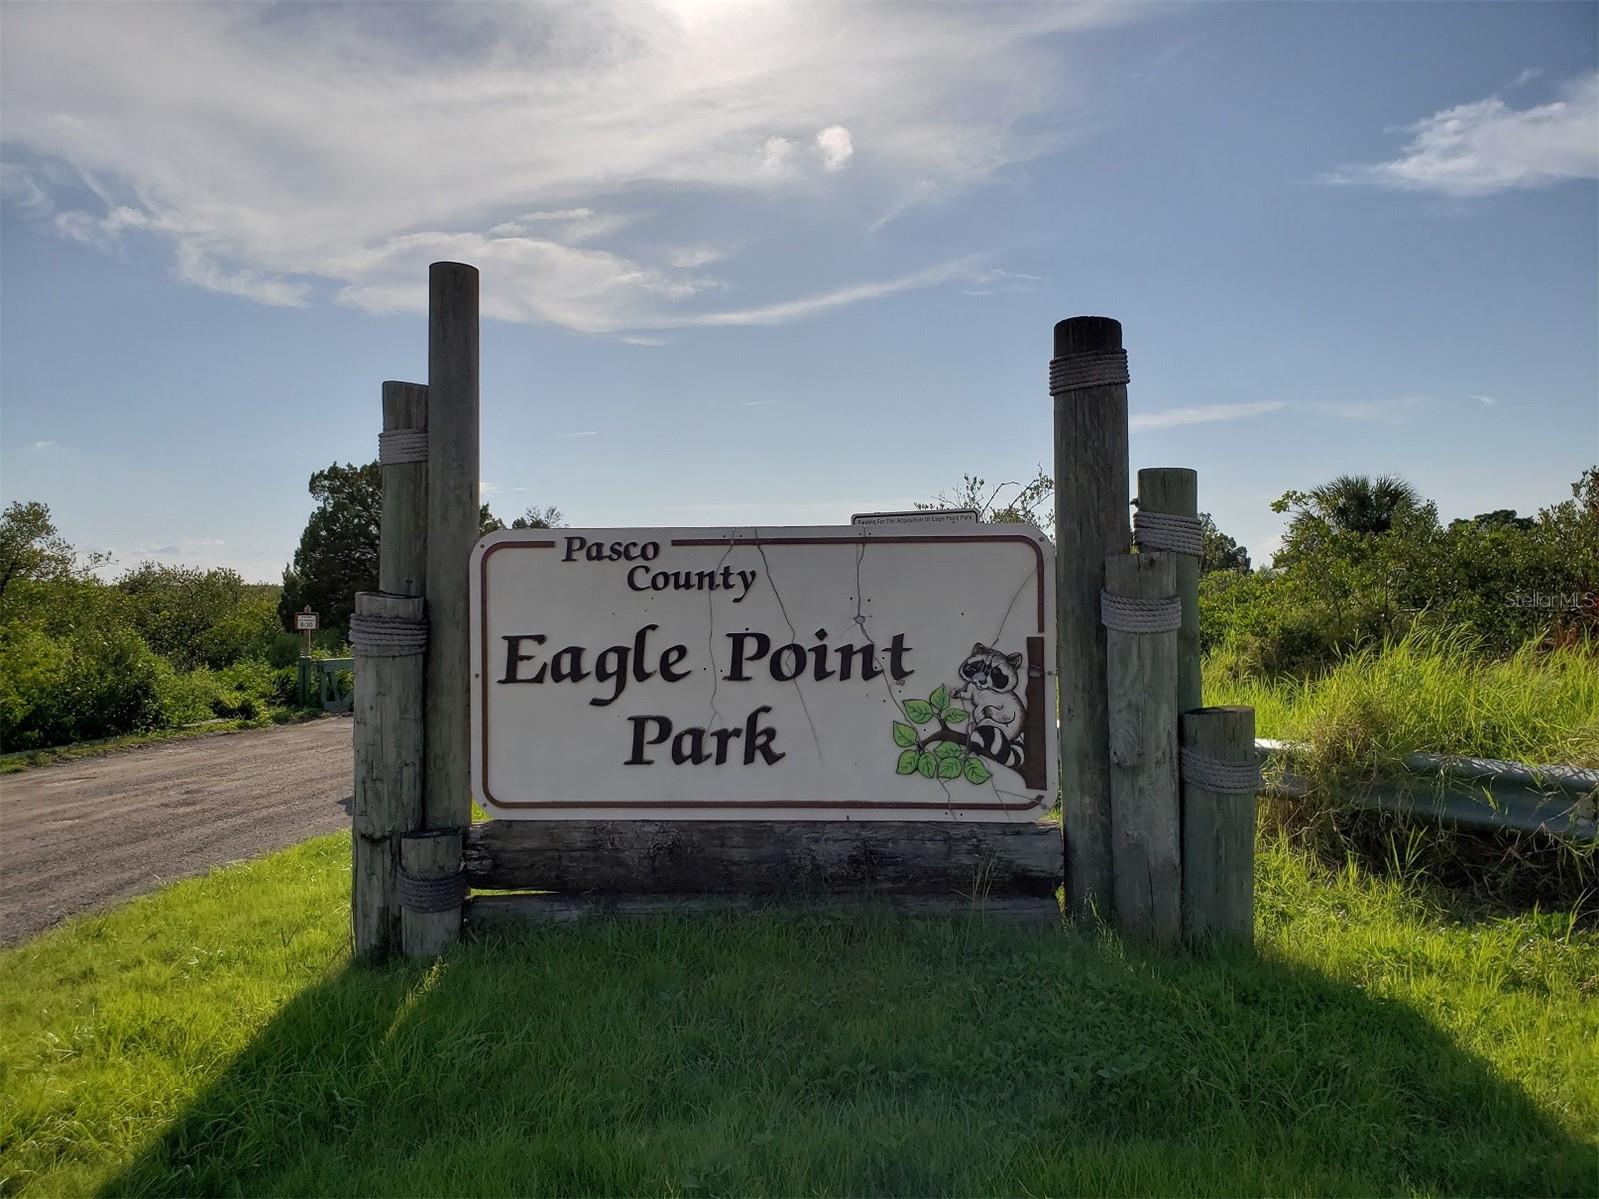 Eagle Point Park: Playground, Picnic Areas, And Walking Trails...